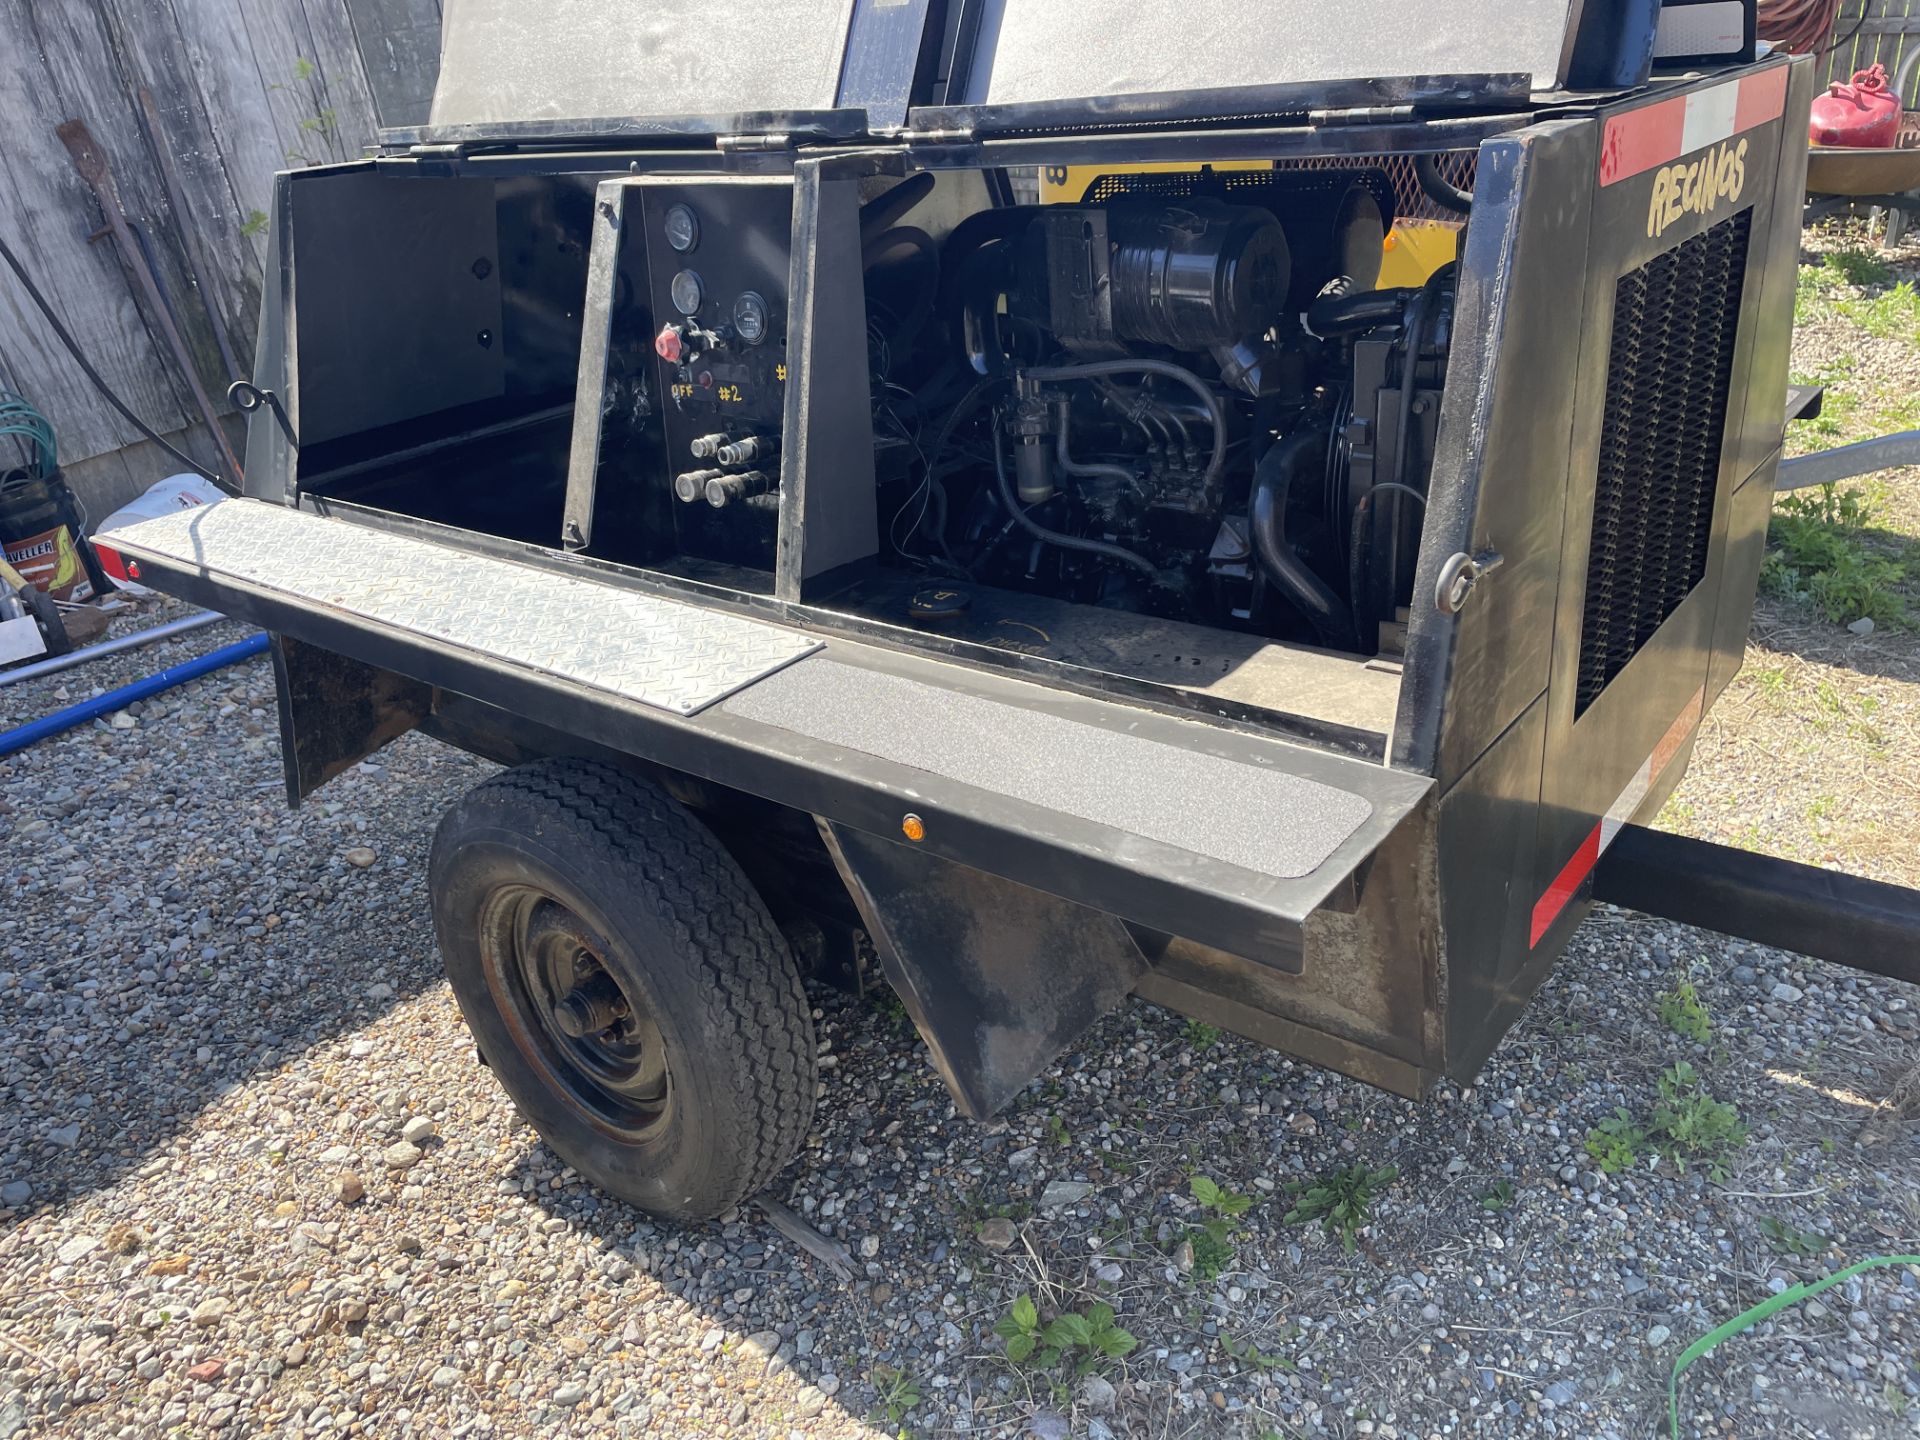 Single Axle Towable Compressor w/3 Cylinder Diesel Engine, Hrs: 1,808 On meter (Starter issues, No T - Image 3 of 9